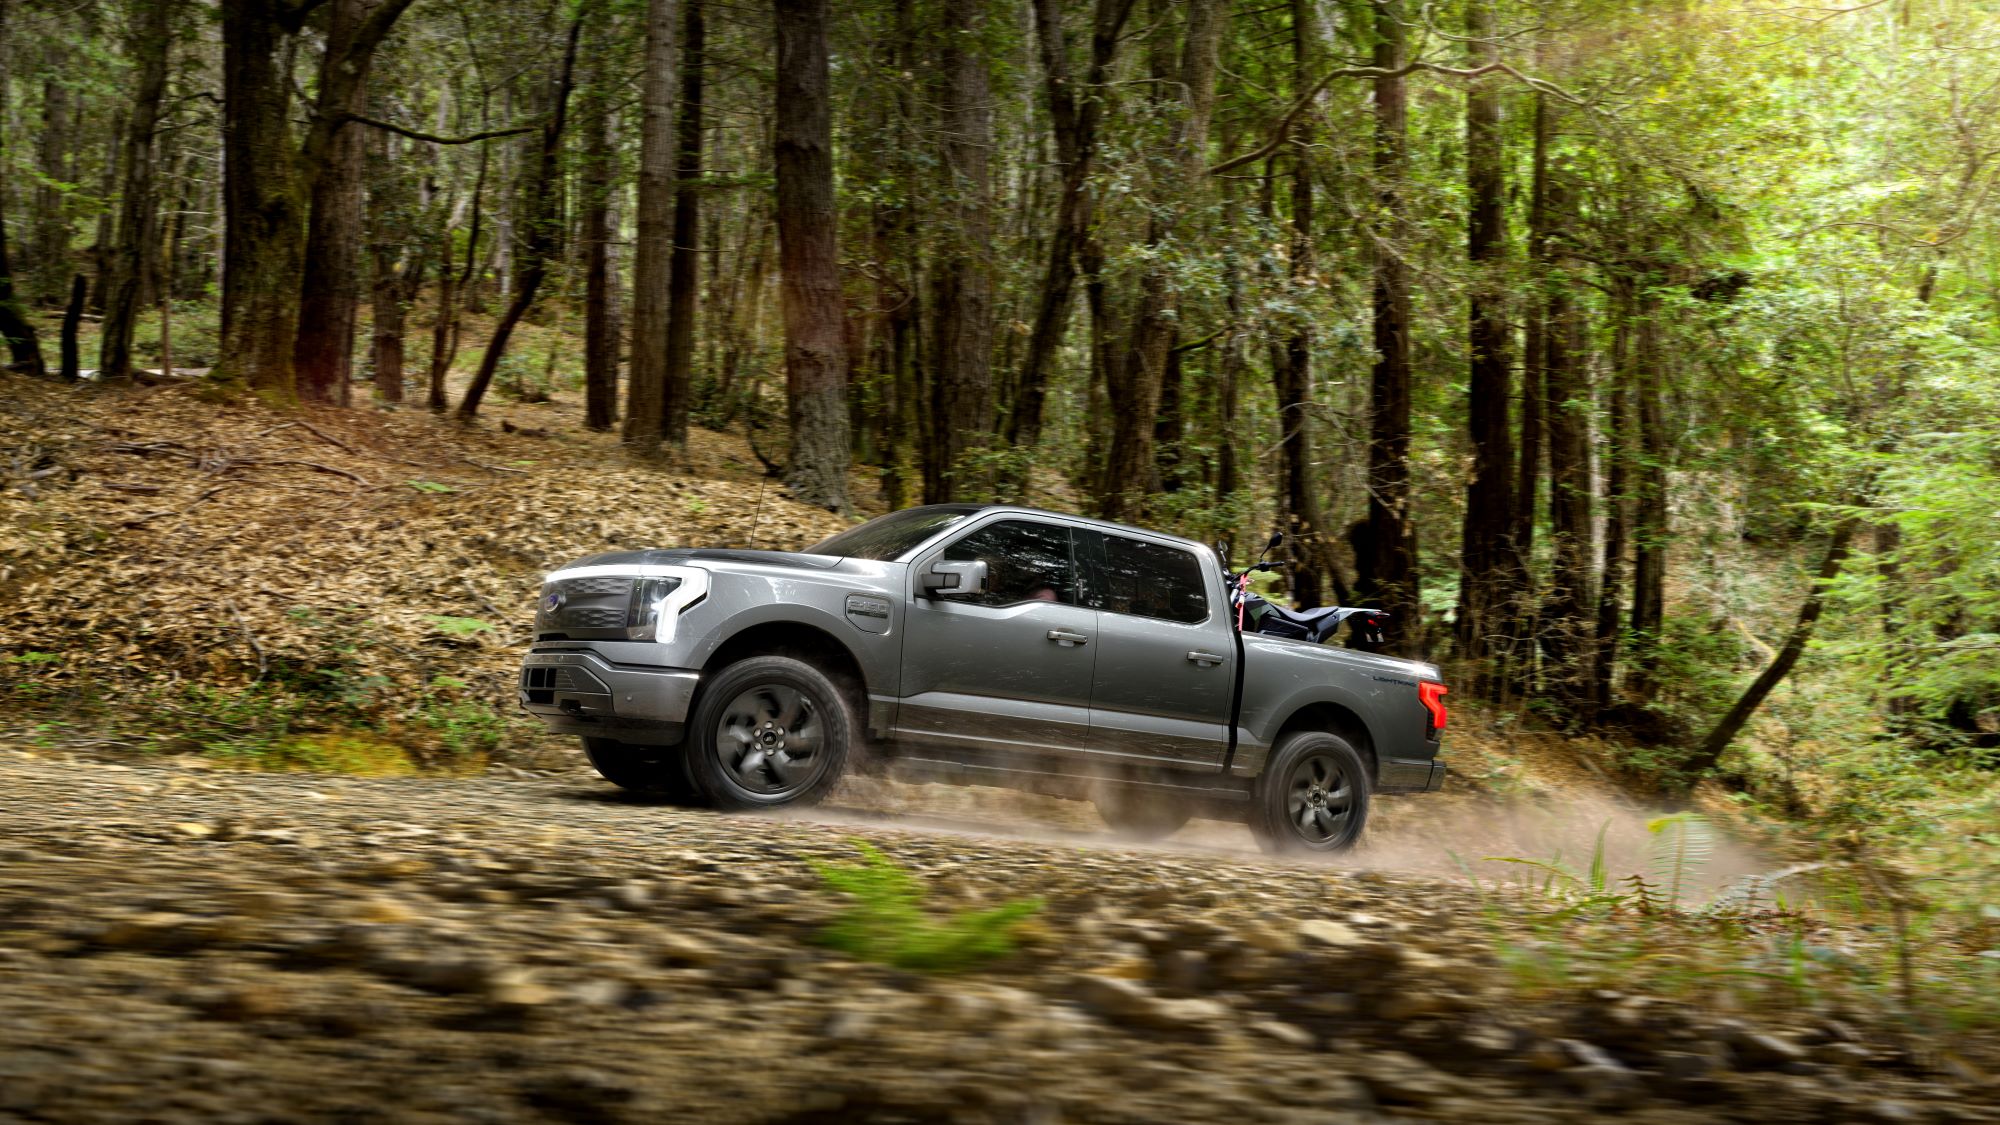 A gray 2022 Ford F-150 Lightning driving on a dirt road in a wooded area.